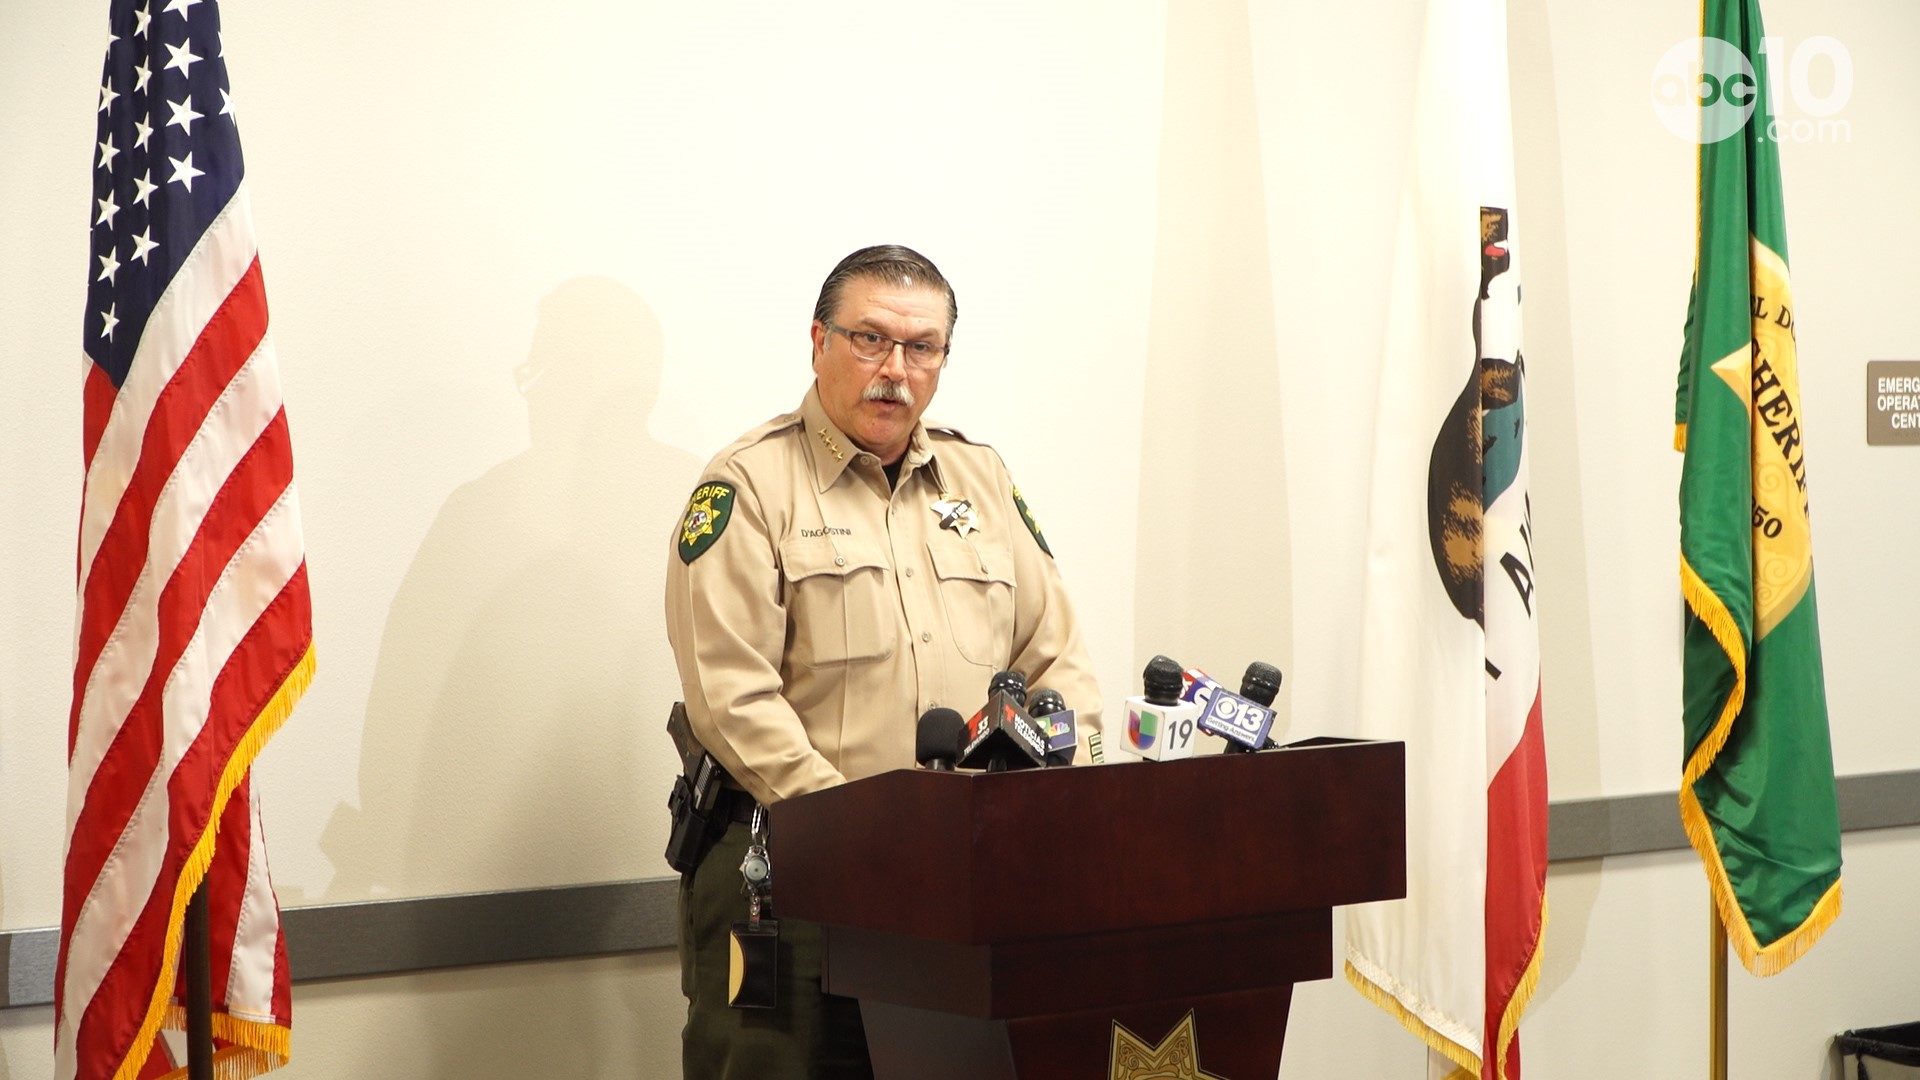 The El Dorado County Sheriff's Office gives an update on the shooting death of Deputy Brian Ishmael, including news of a third arrest.